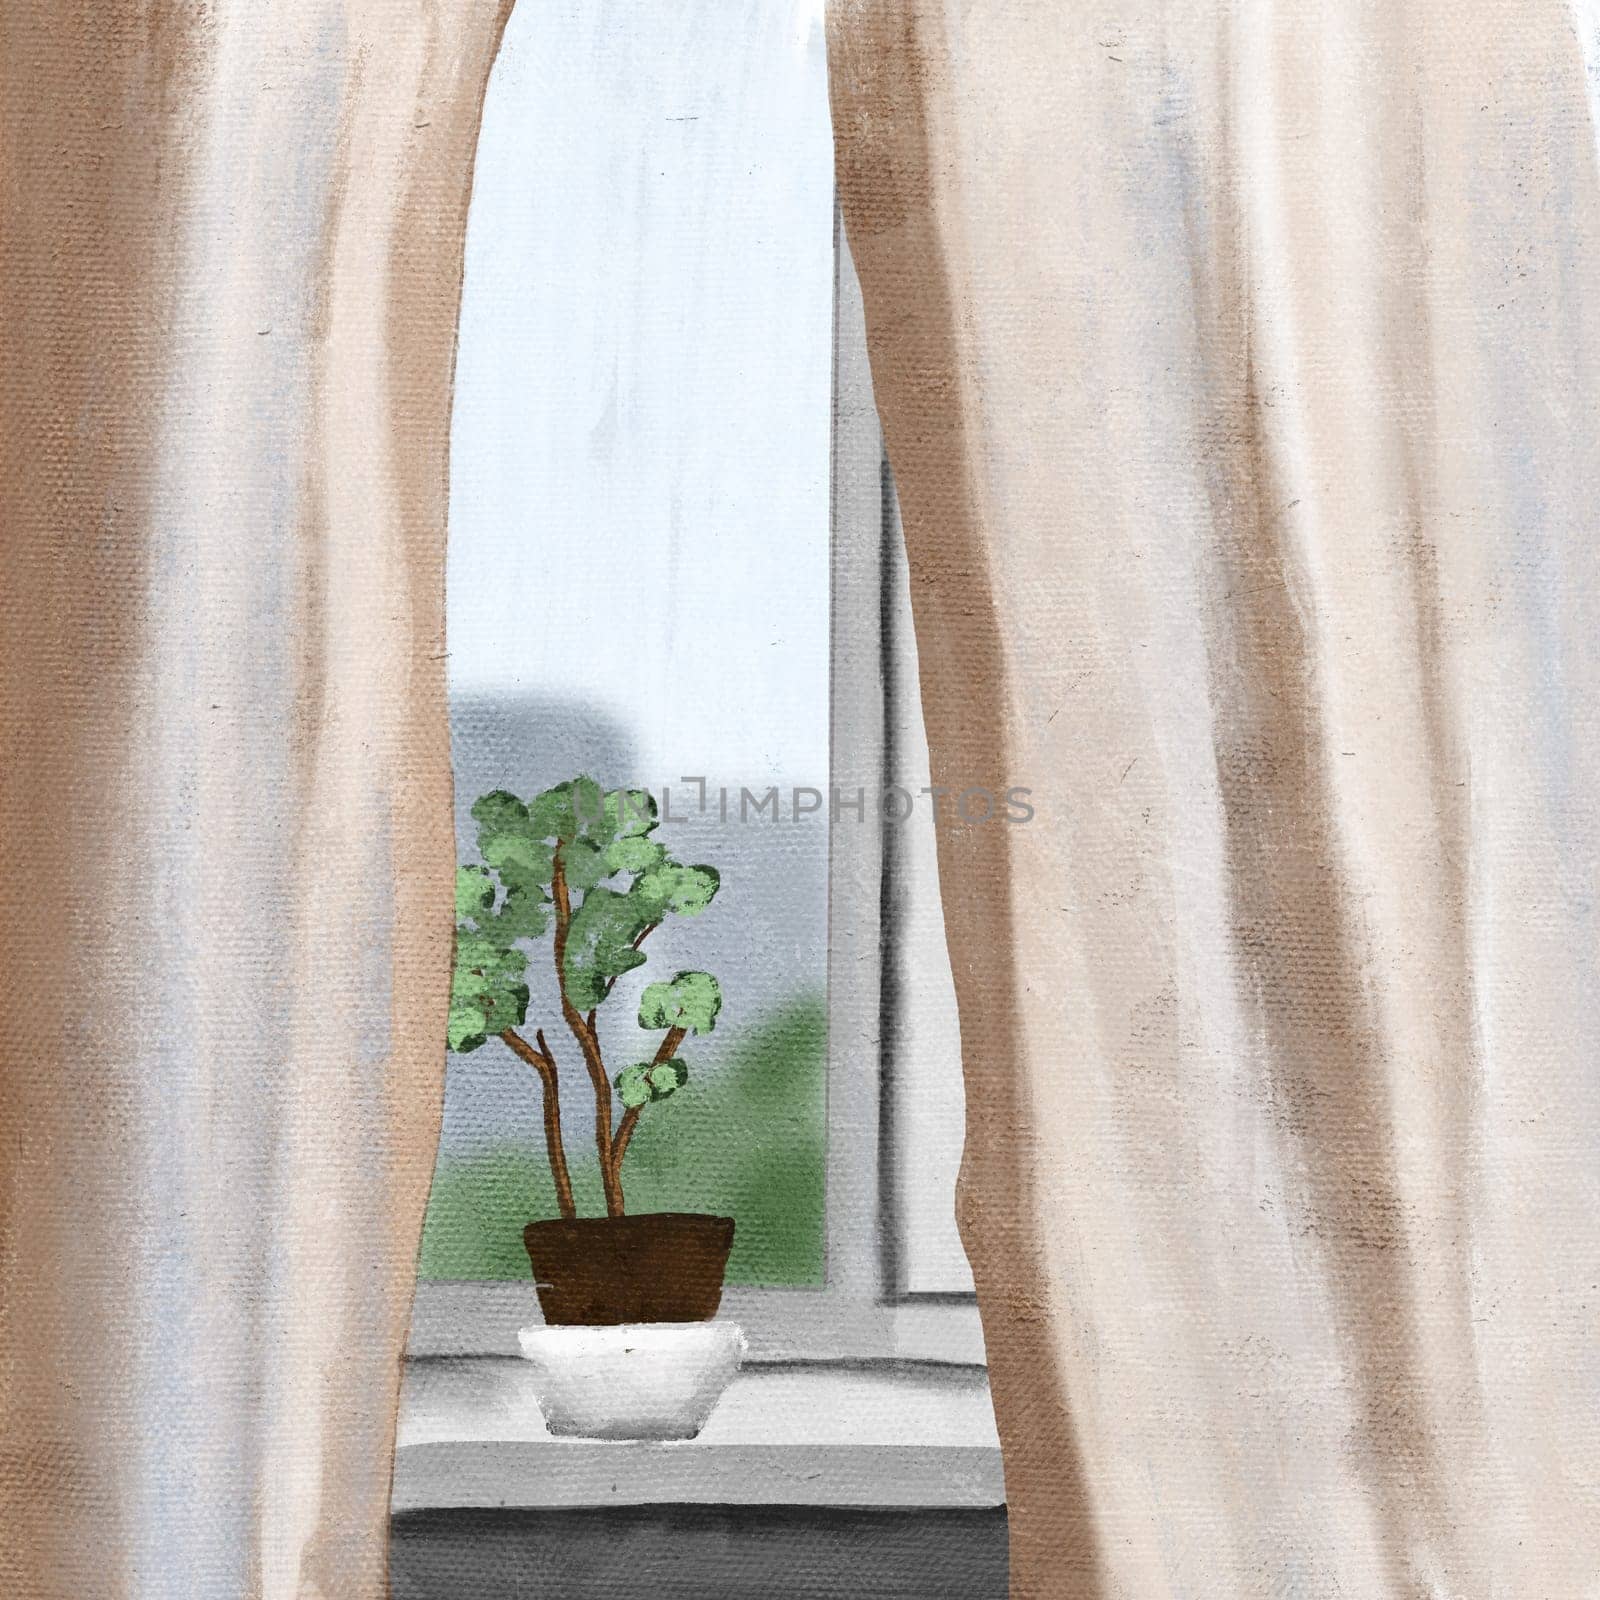 Hand drawn illustration of room window windowsill with houseplant, city town view. Beige curtains indoor interior modern minimalist house, decoration room design green nature building. by Lagmar